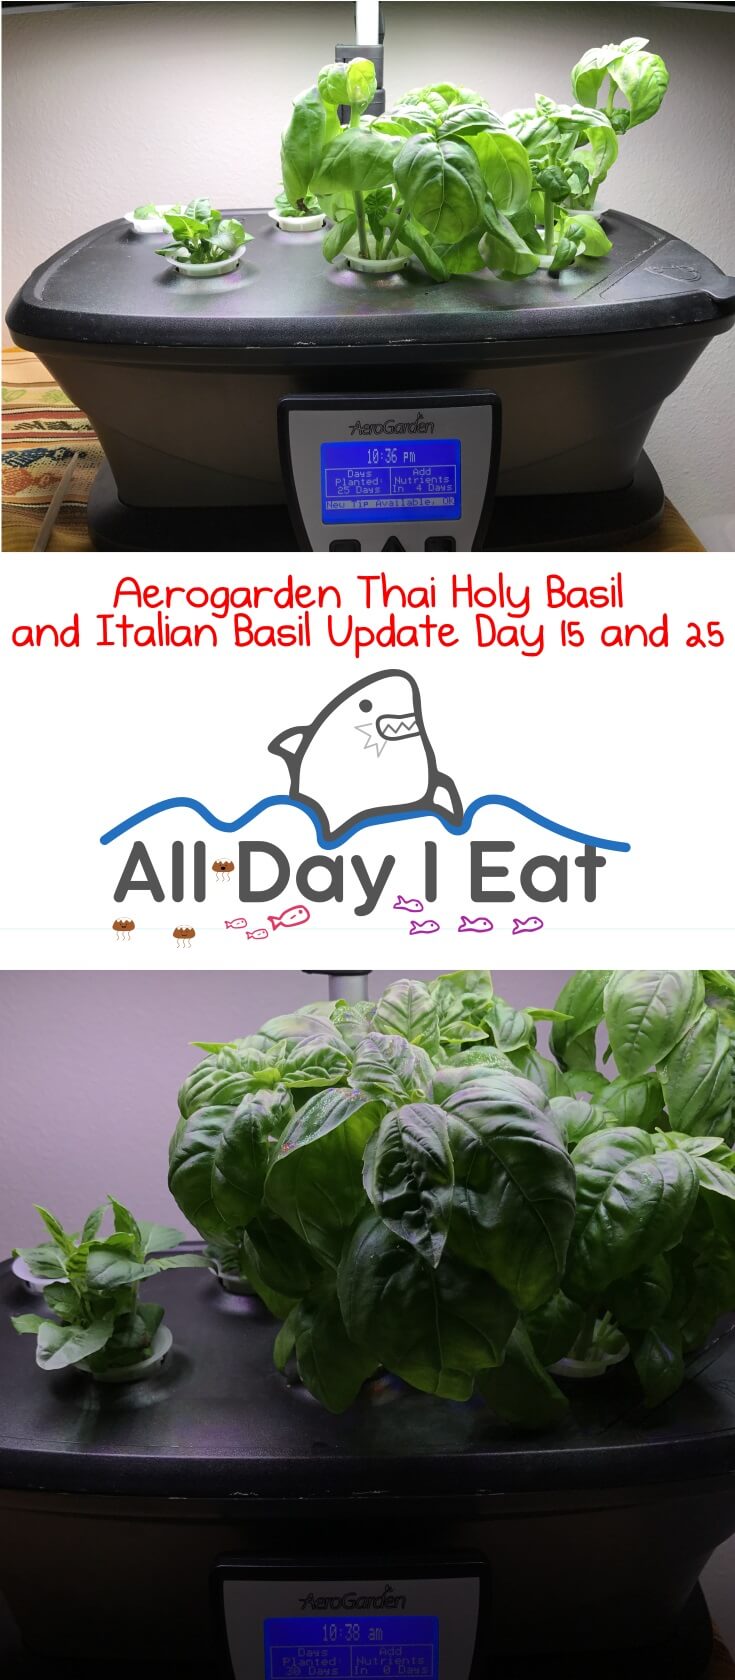 Aerogarden Thai Holy Basil and Italian Basil Update Day 15 and 25. Growing your own herbs indoors, hydroponically, and organically couldn't be any easier! | www.alldayieat.com